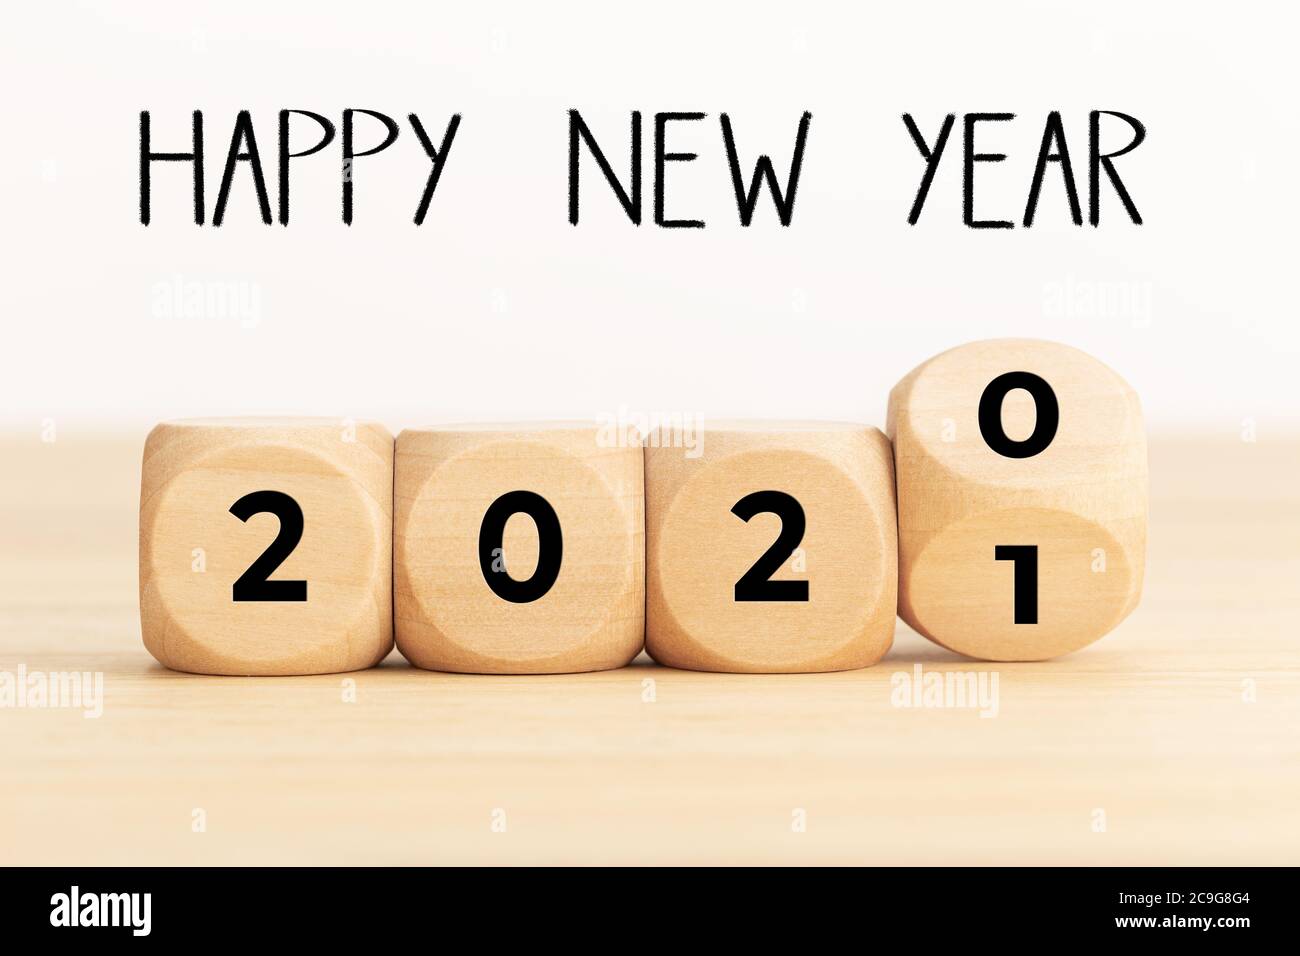 Happy New year concept. Wooden Blocks With 2020 2021 Number and handmade text Stock Photo